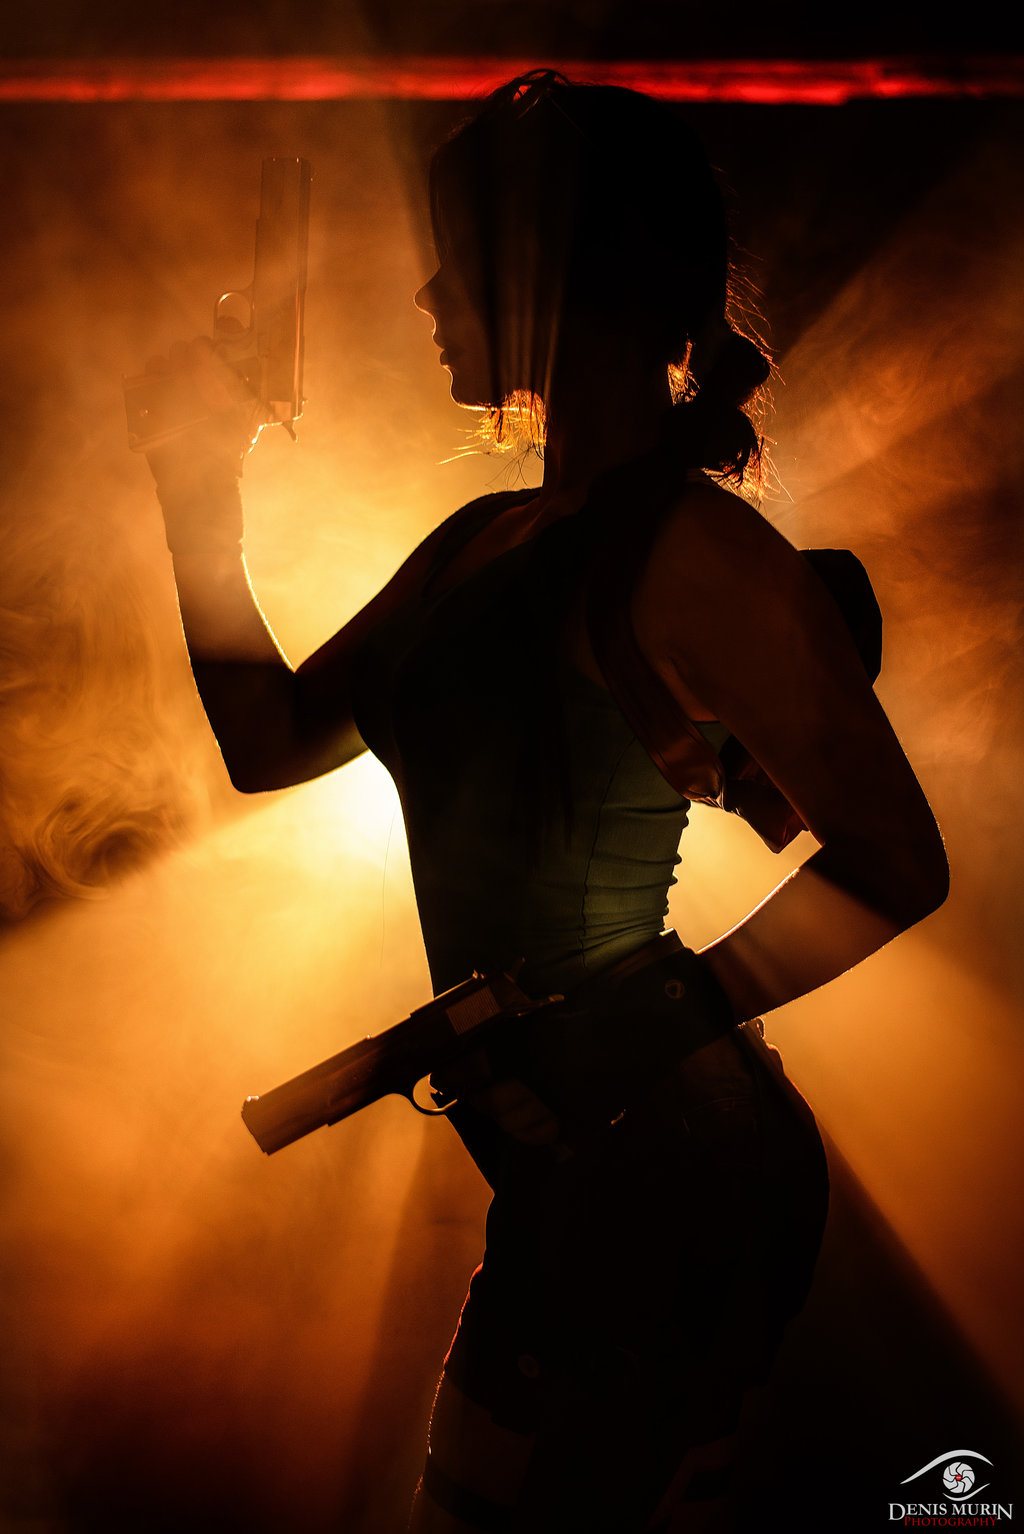 Cosplay For Fans Of Old Lara Croft